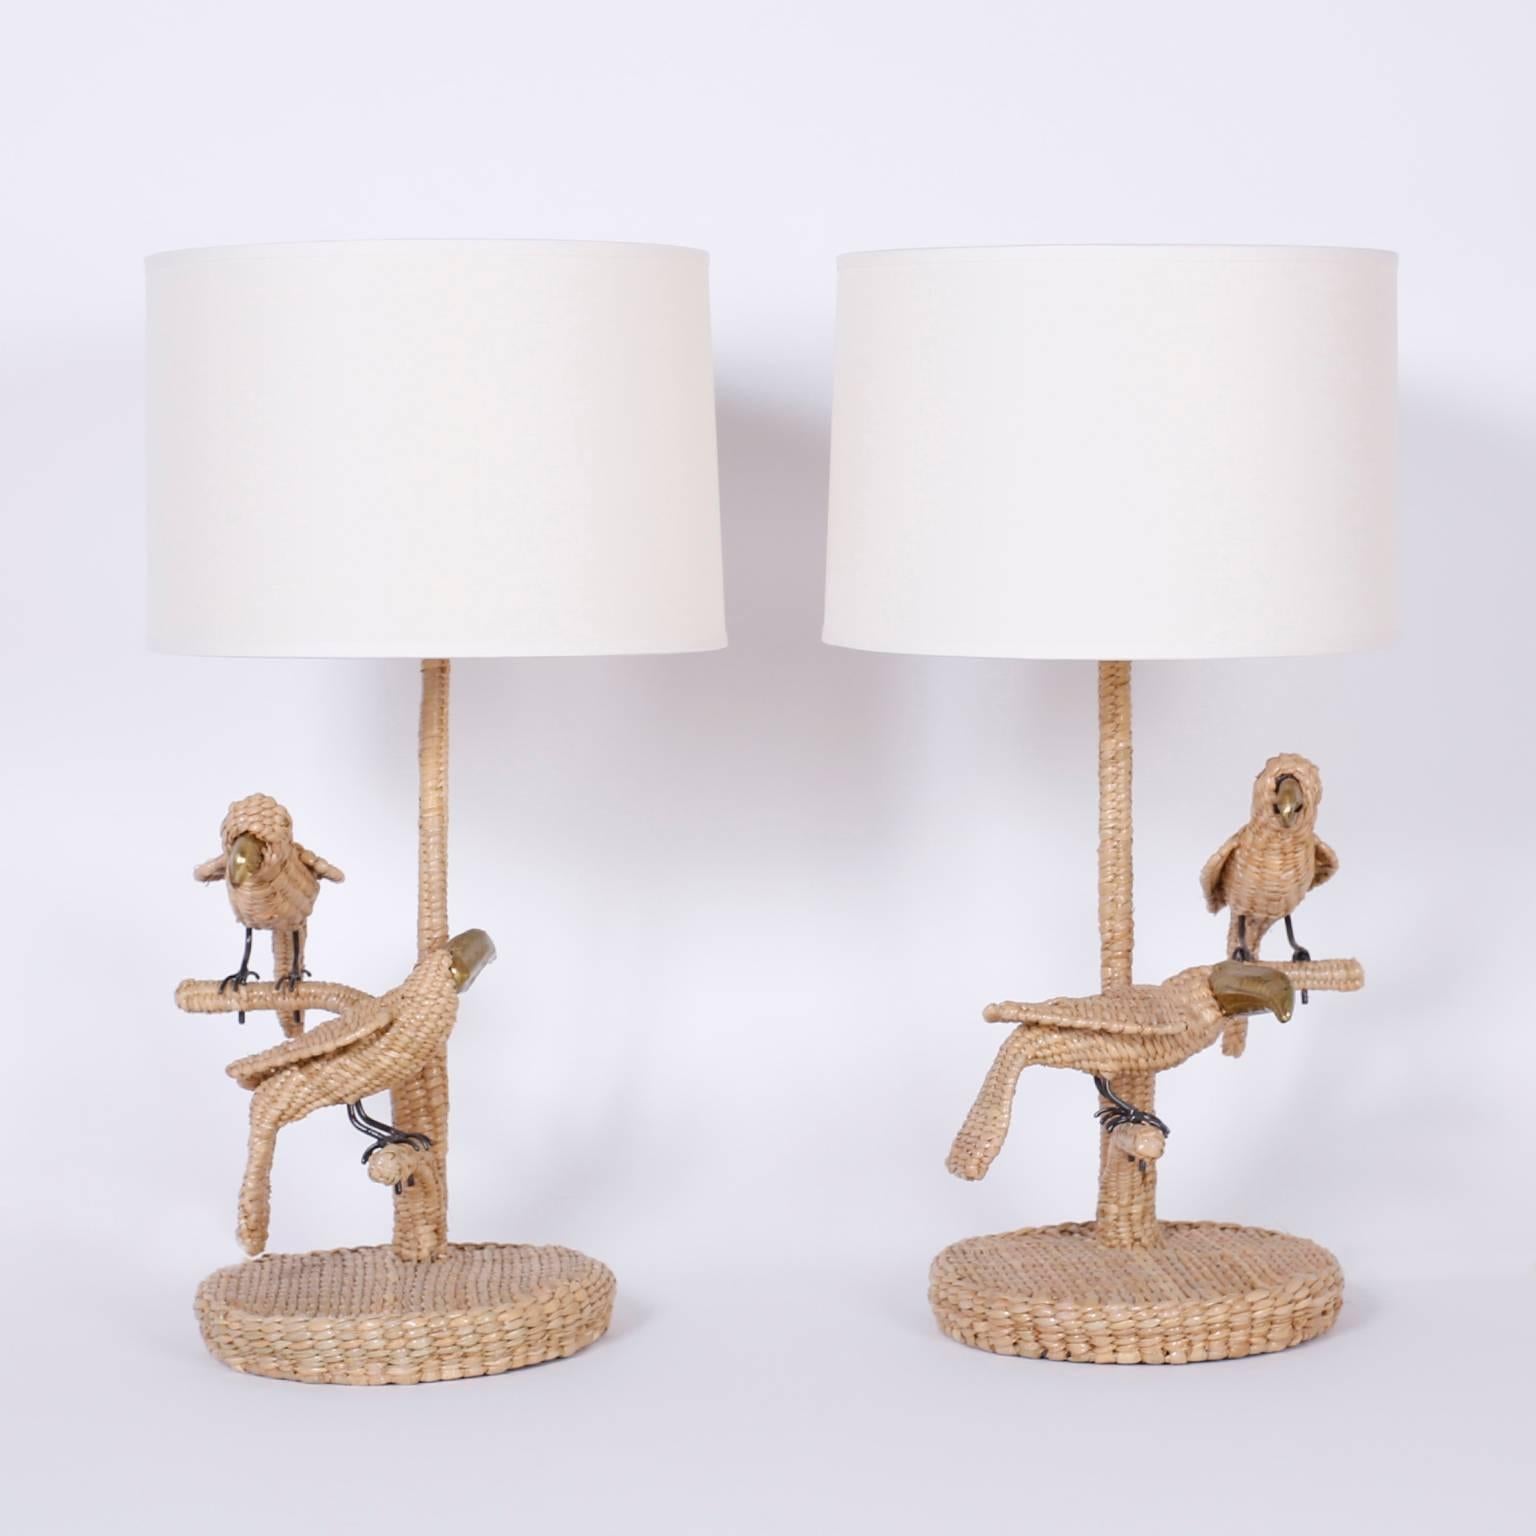 Amusing pair of wicker bird table lamps with a parrot and a toucan perched on each
one. Crafted with reed wrapped over a metal frame. Signed Mario Torres
on a medallion and  your choice of a wicker or linen shade.